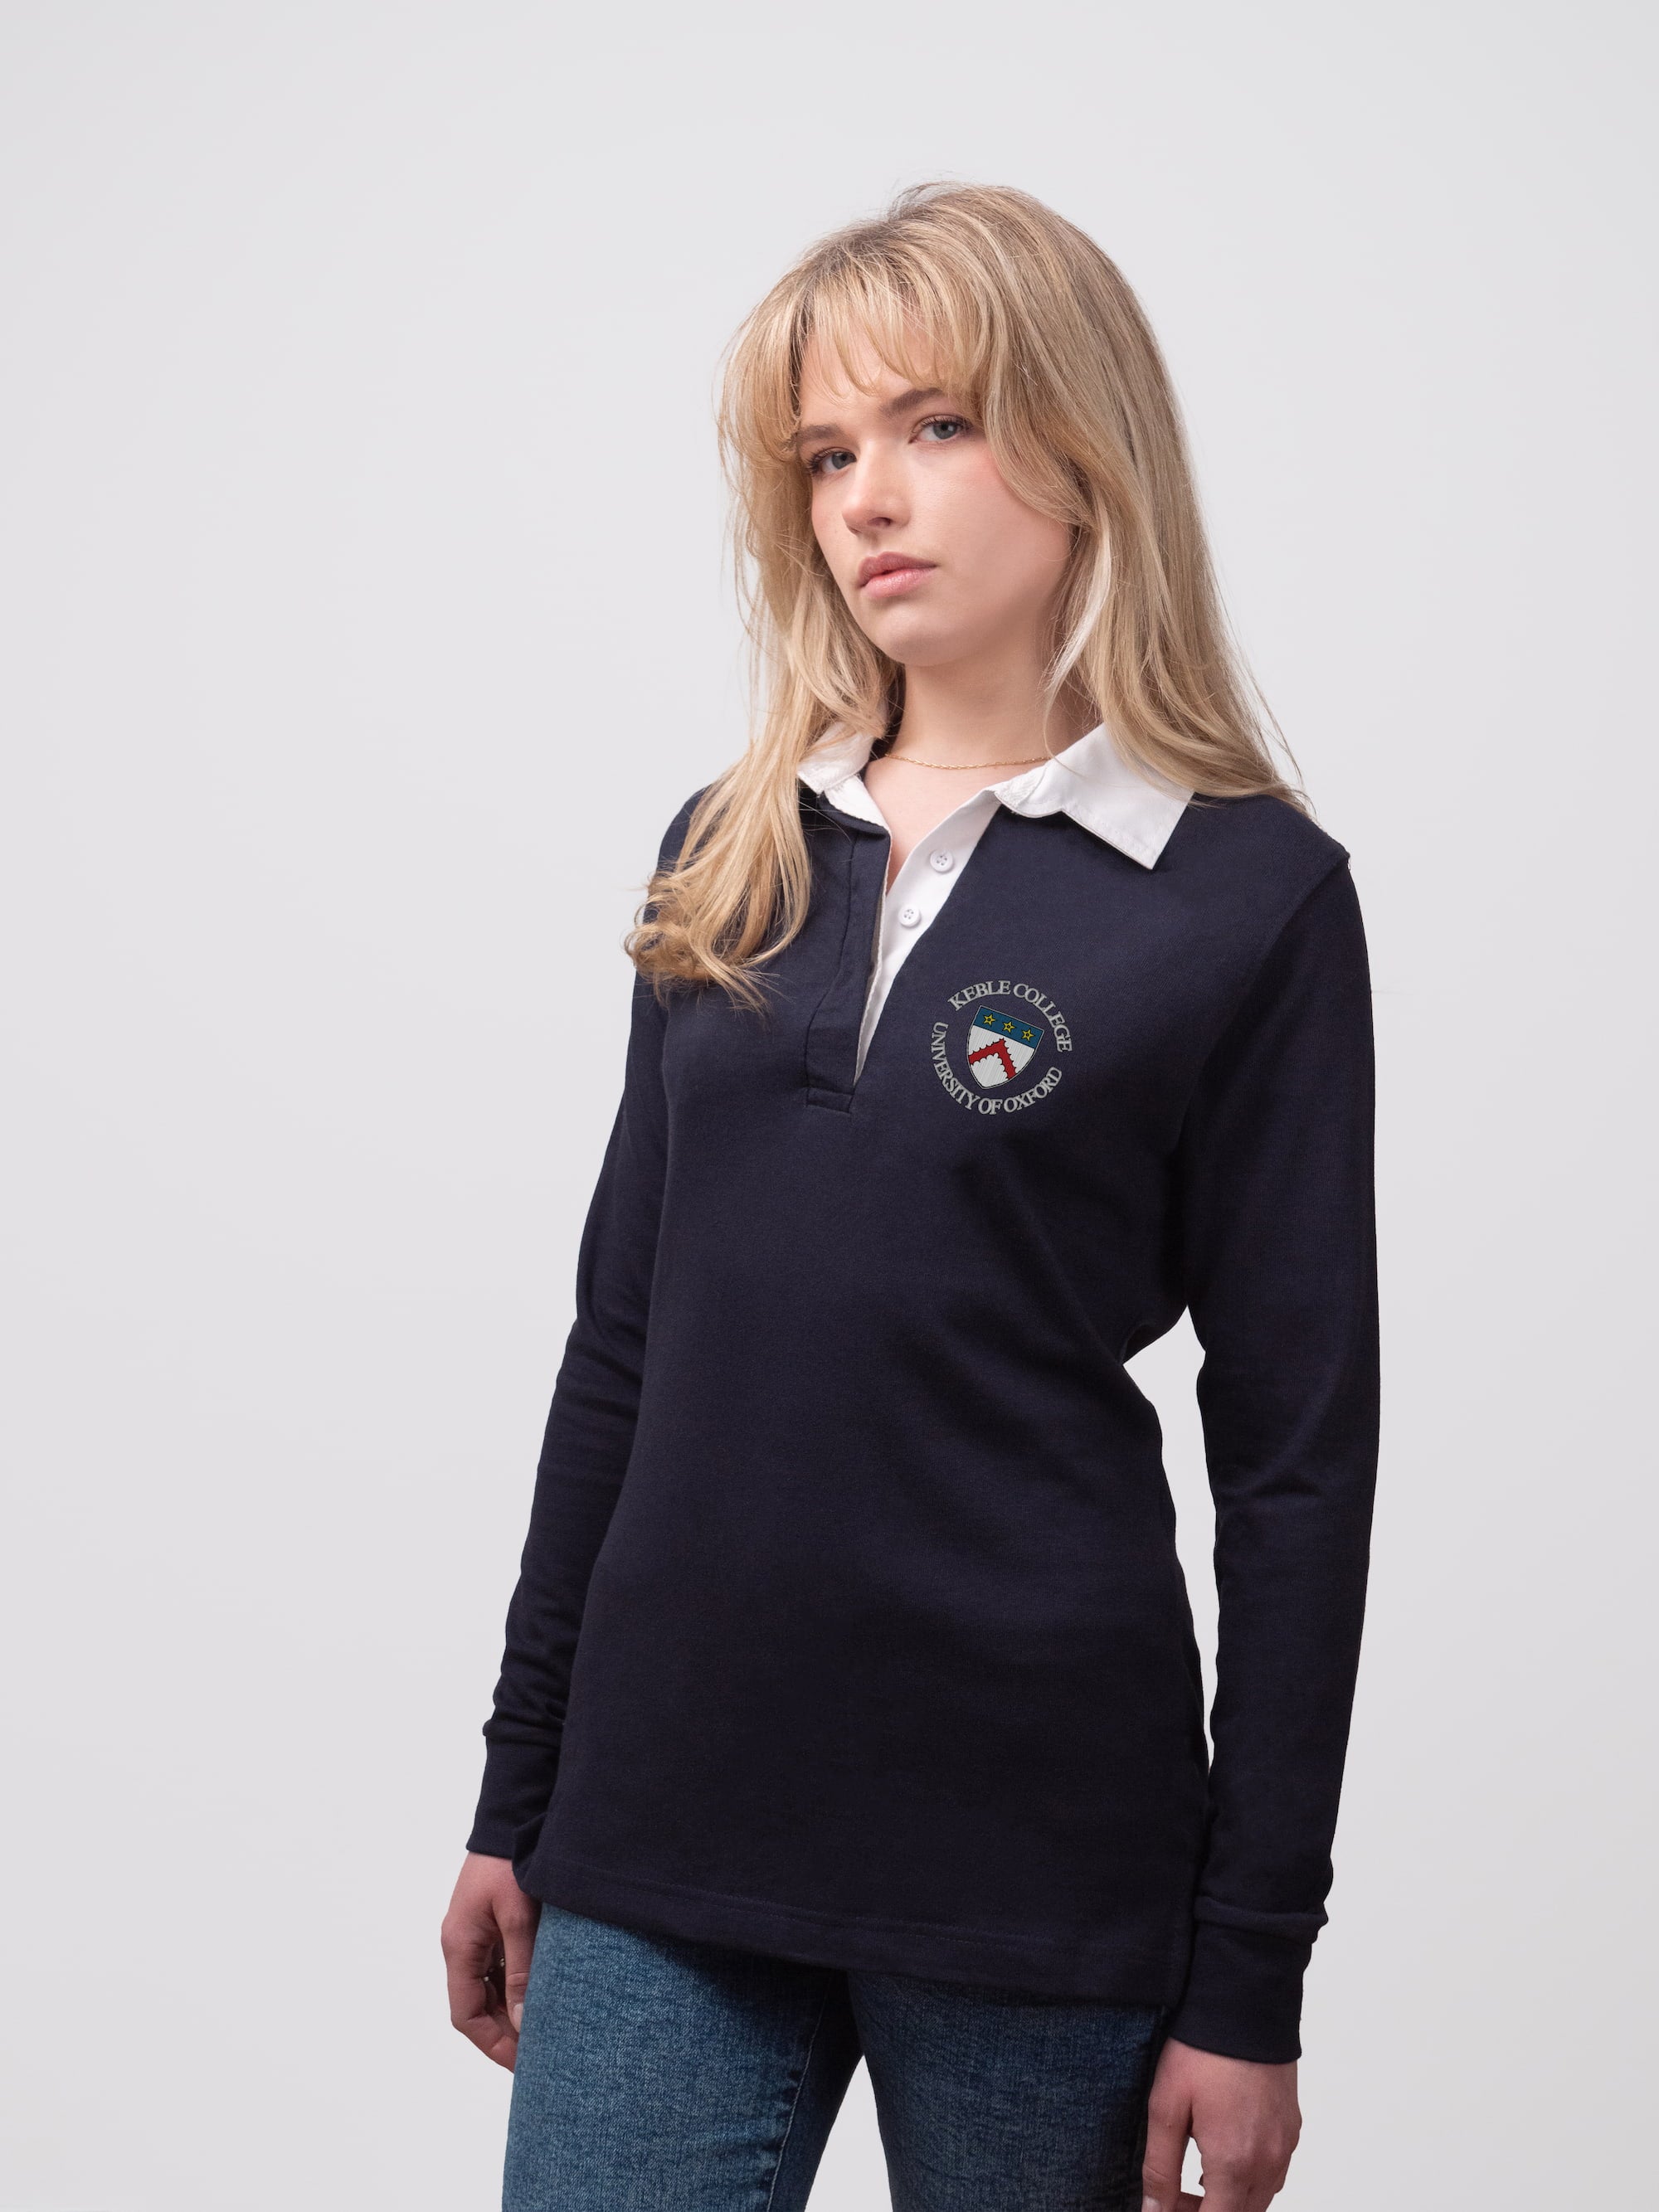 Student wearing a navy Keble College rugby shirt with embroidered crest